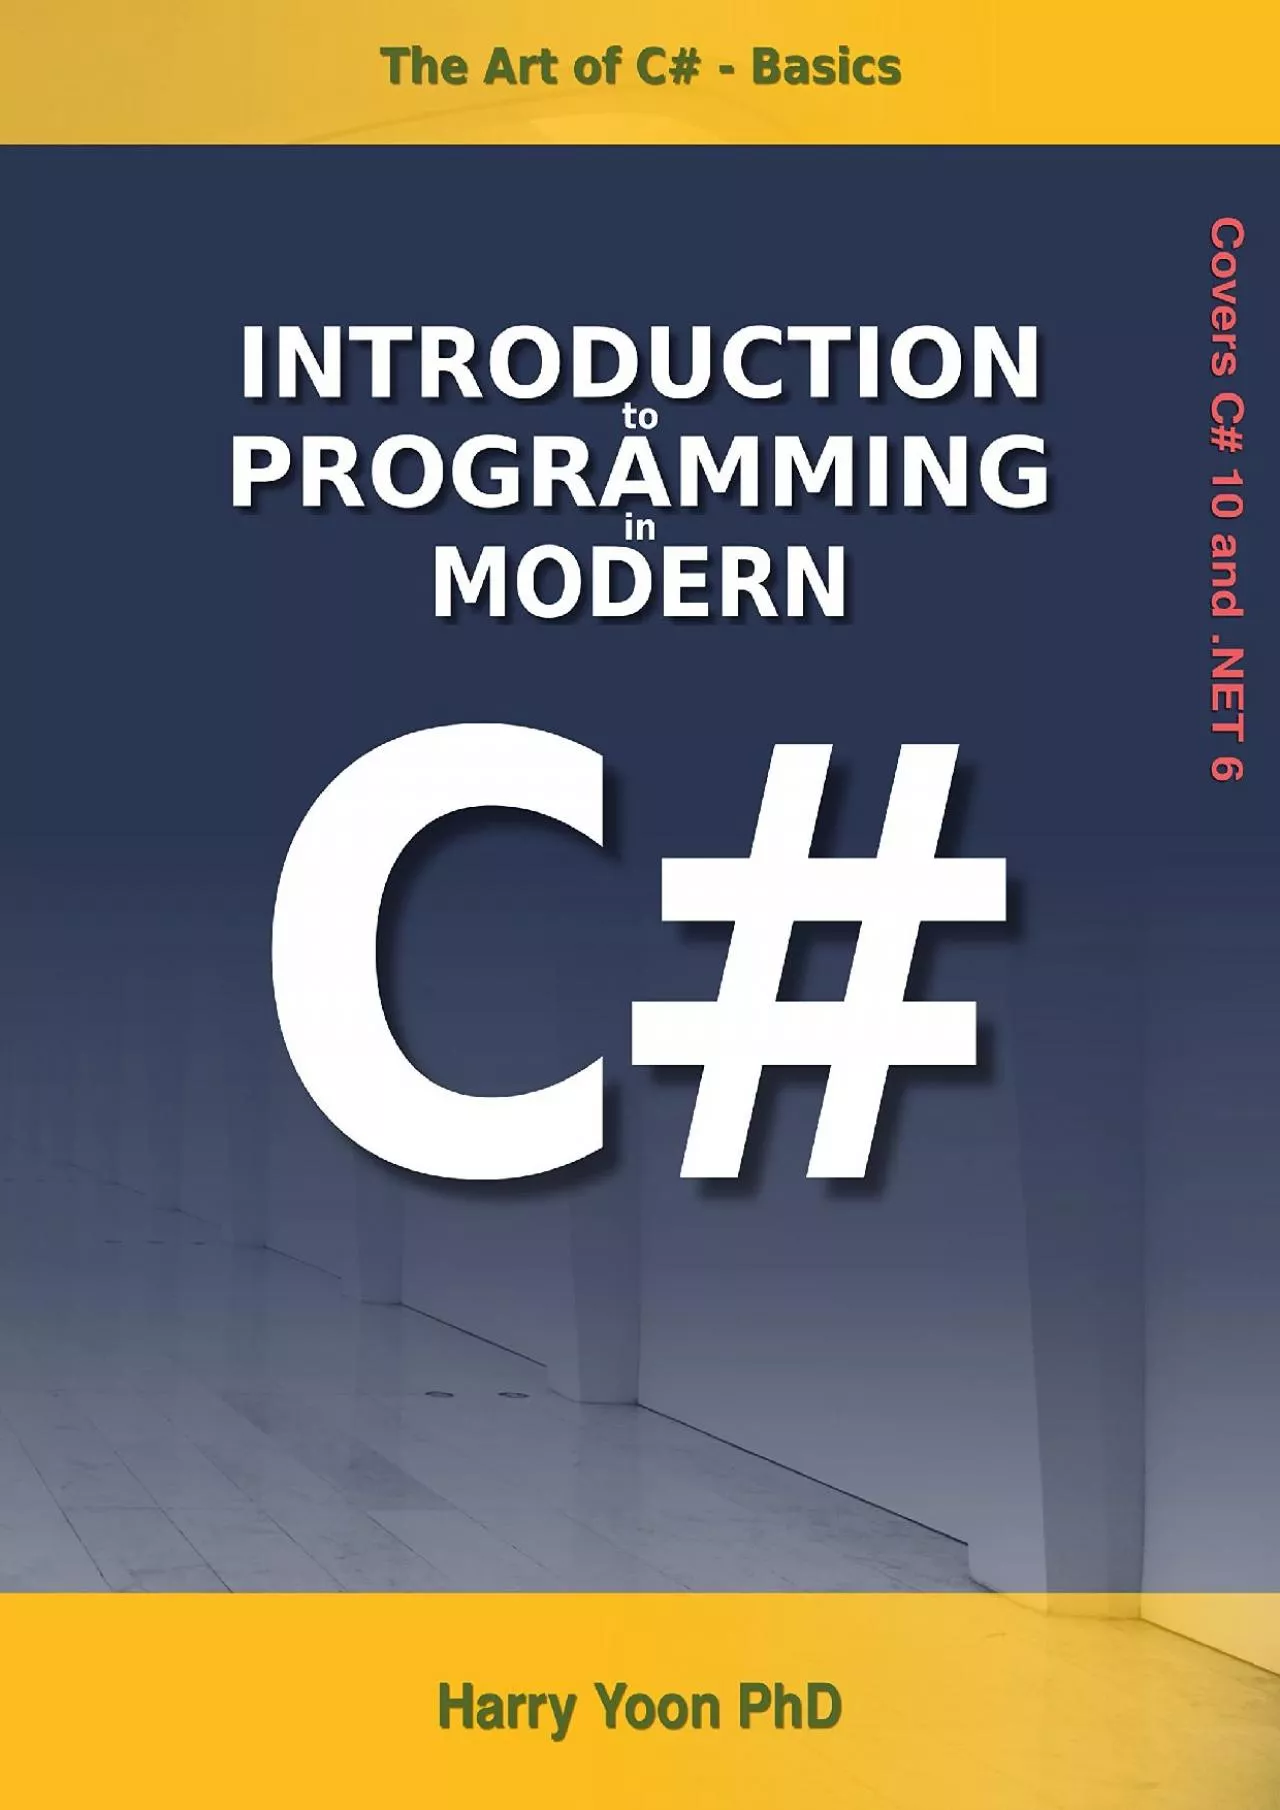 [READING BOOK]-The Art of C - Basics: Introduction to Programming in Modern C - Beginner